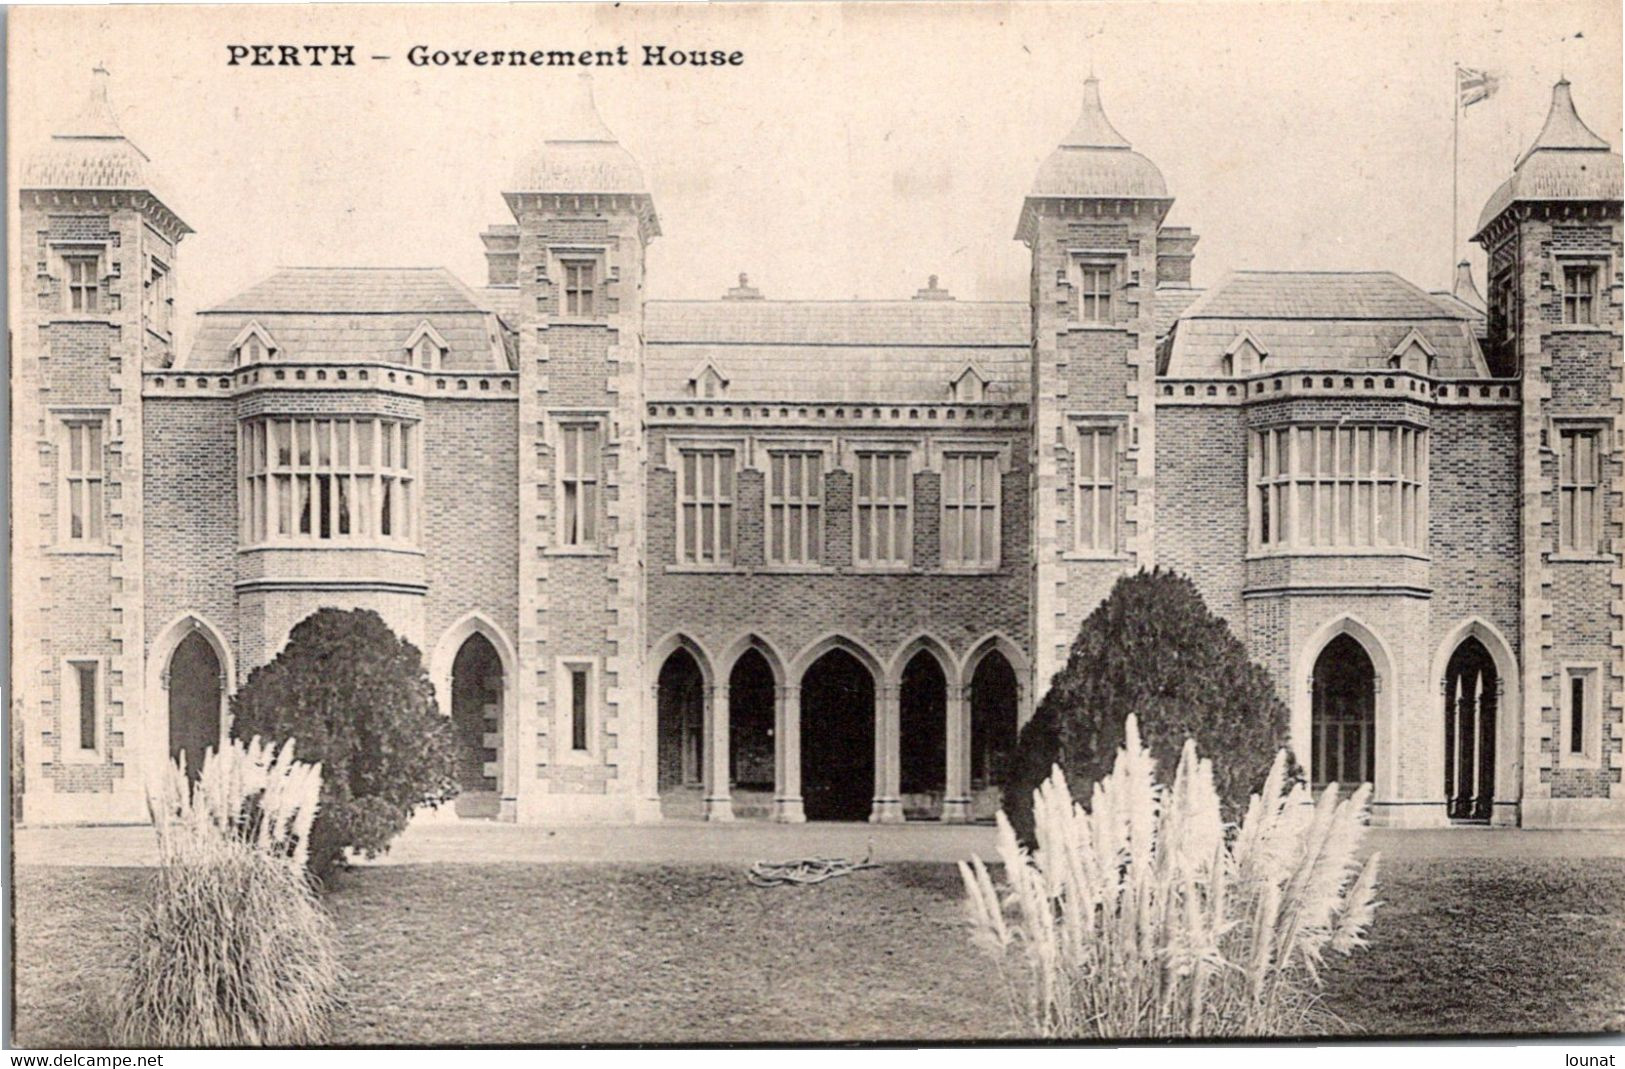 PERTH - Governement House - Perth